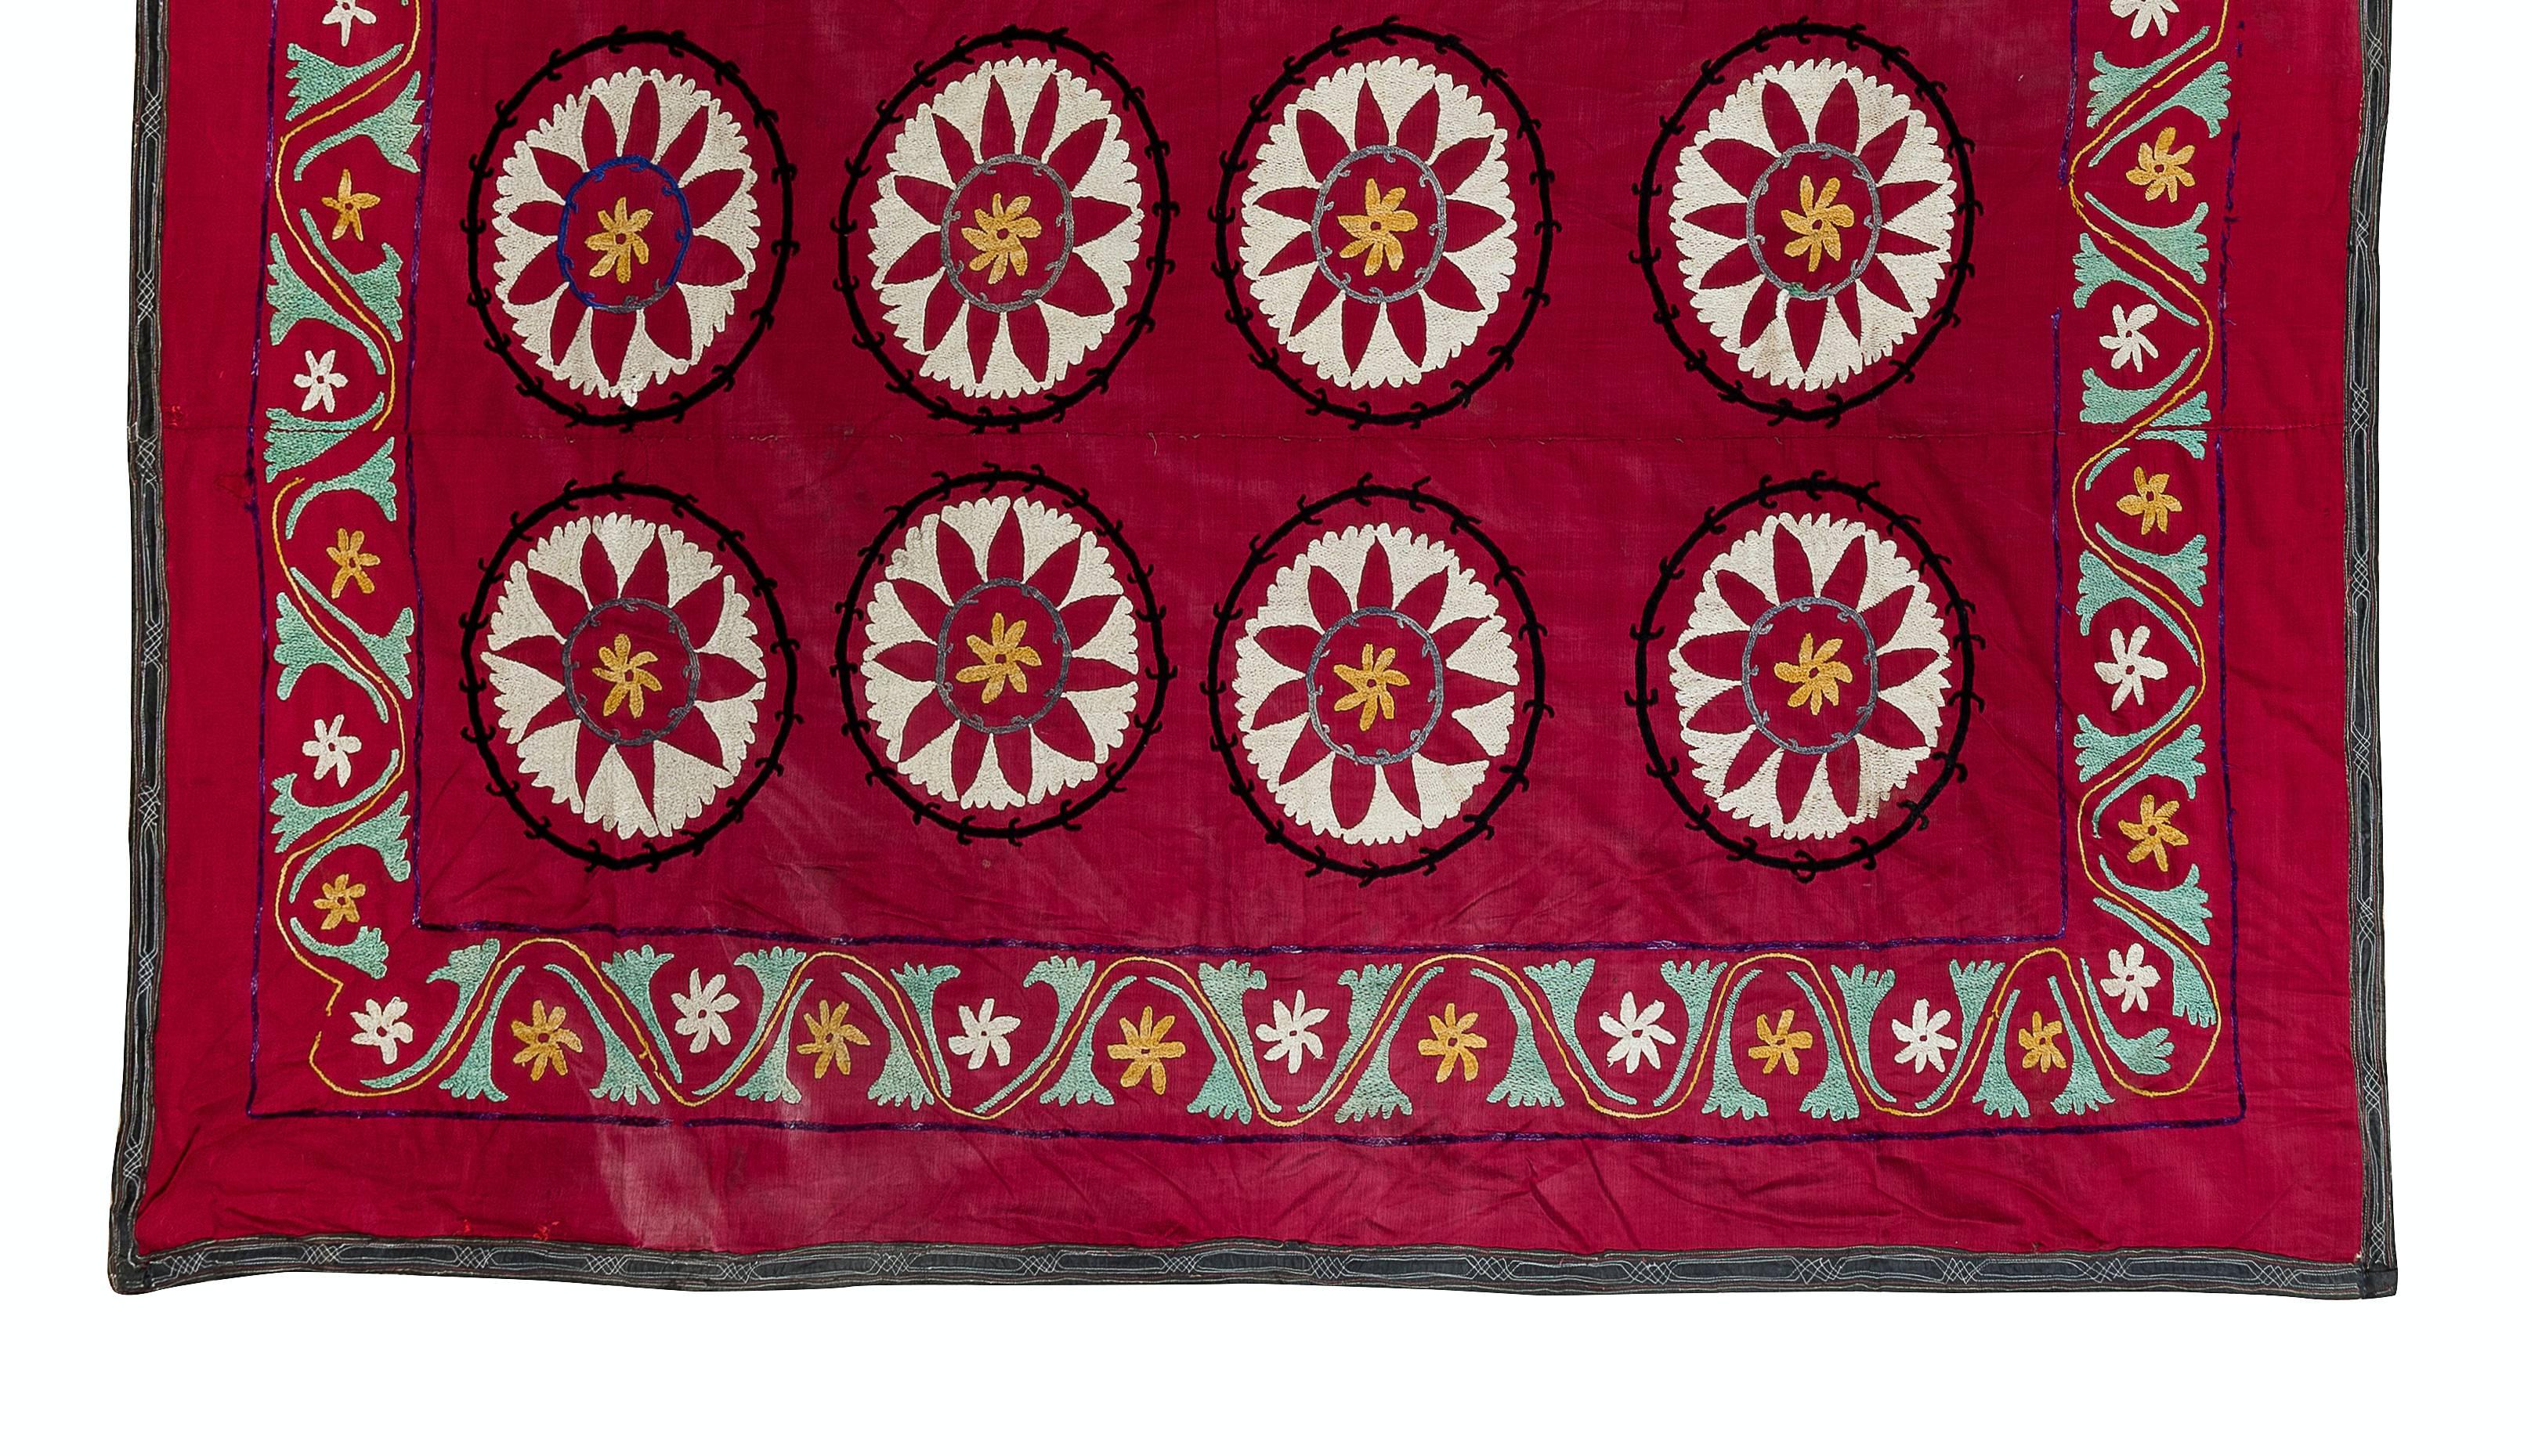 Uzbek 6.9x6.9 Ft Vintage Silk Hand Embroidery Red Bed Cover, Asian Suzani Wall Hanging For Sale